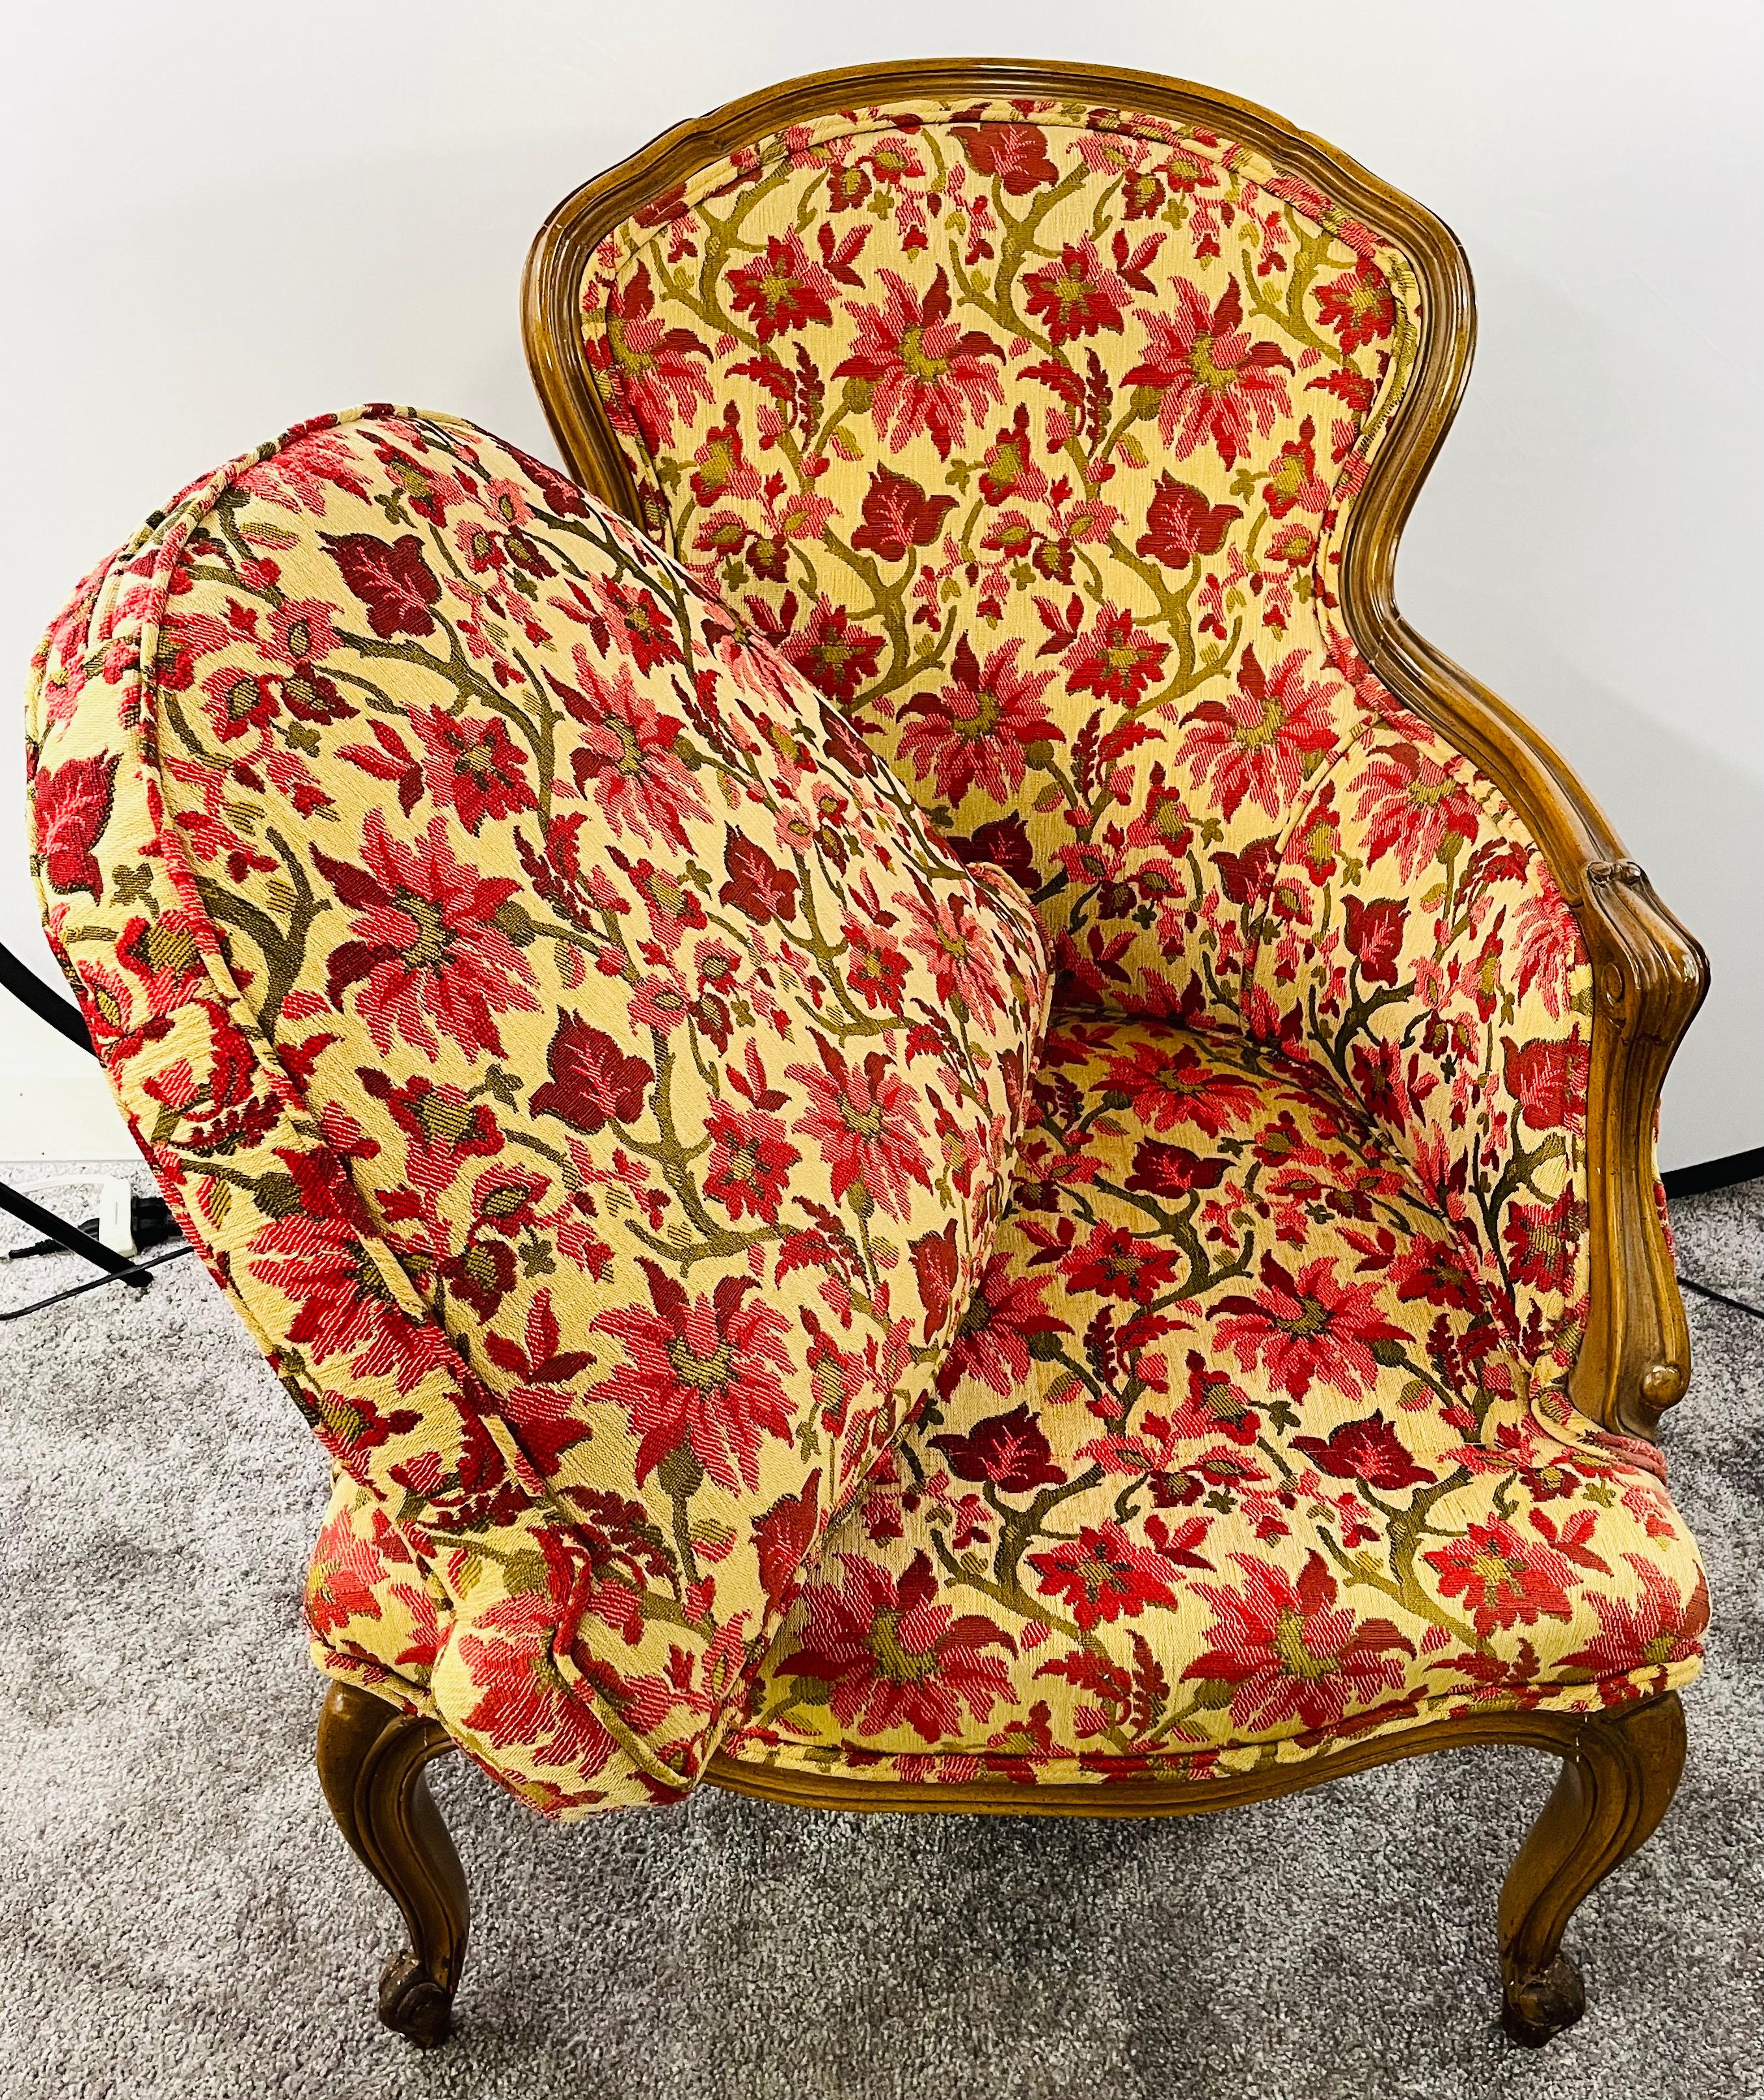 19th Century French Louis XV Bergere Arm Chair in a Fine Floral Upholstery For Sale 9